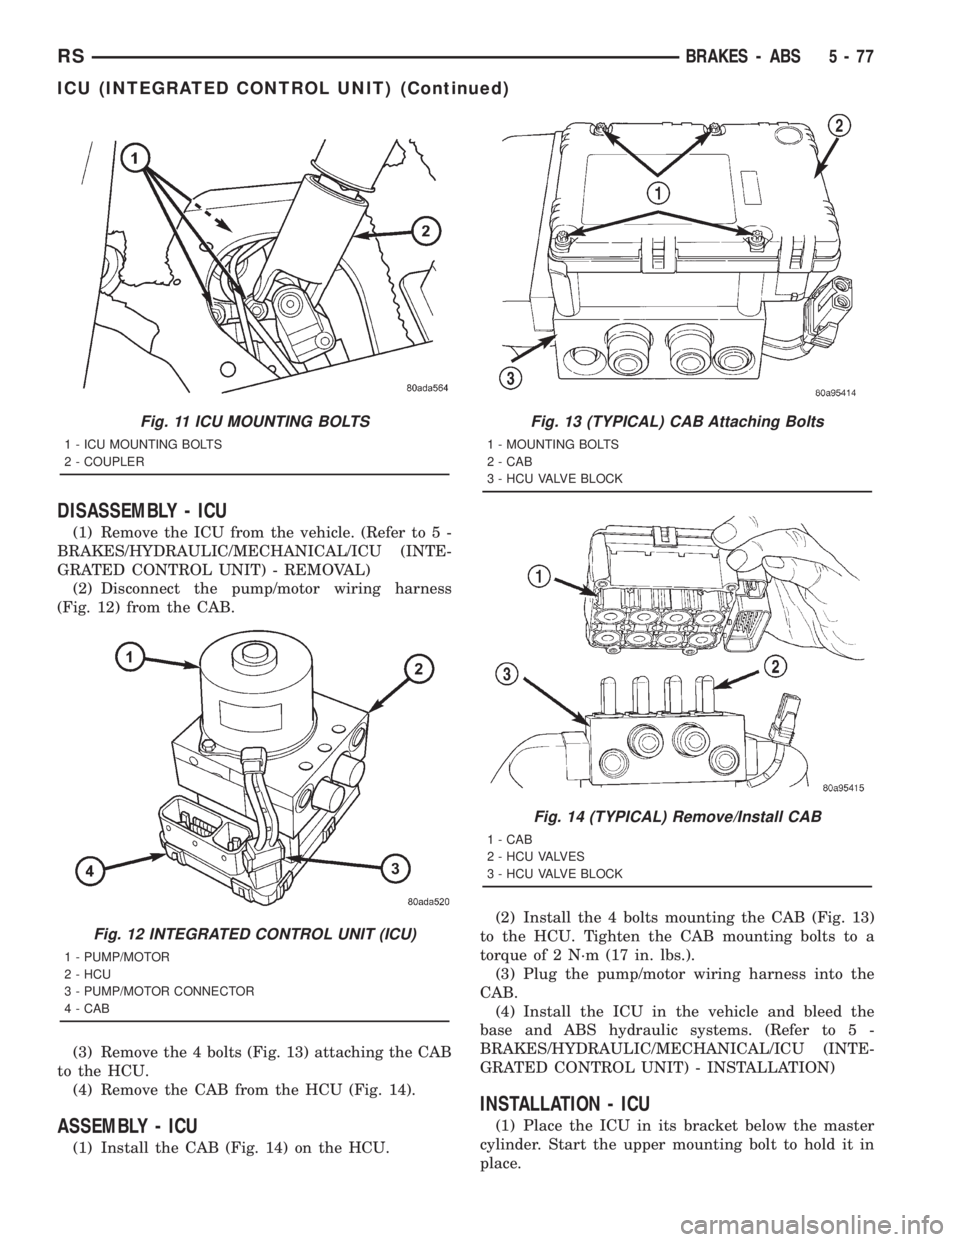 CHRYSLER VOYAGER 2001  Service Manual DISASSEMBLY - ICU
(1) Remove the ICU from the vehicle. (Refer to 5 -
BRAKES/HYDRAULIC/MECHANICAL/ICU (INTE-
GRATED CONTROL UNIT) - REMOVAL)
(2) Disconnect the pump/motor wiring harness
(Fig. 12) from 